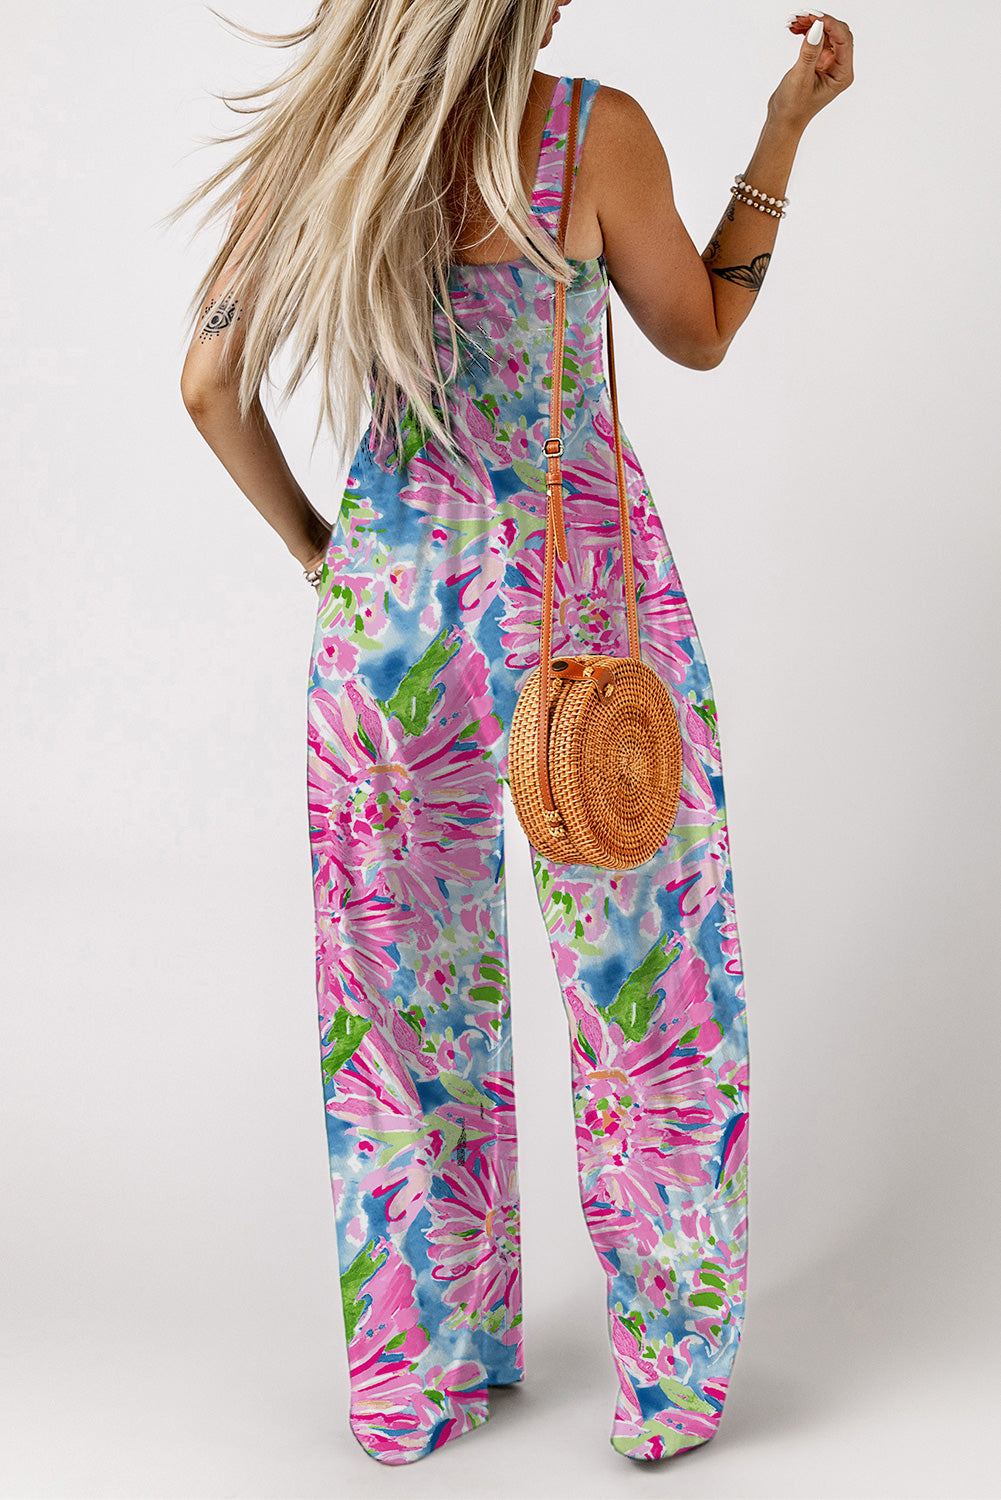 Scarlett Floral Smocked Square Neck Jumpsuit with Pockets - Coco and lulu boutique 